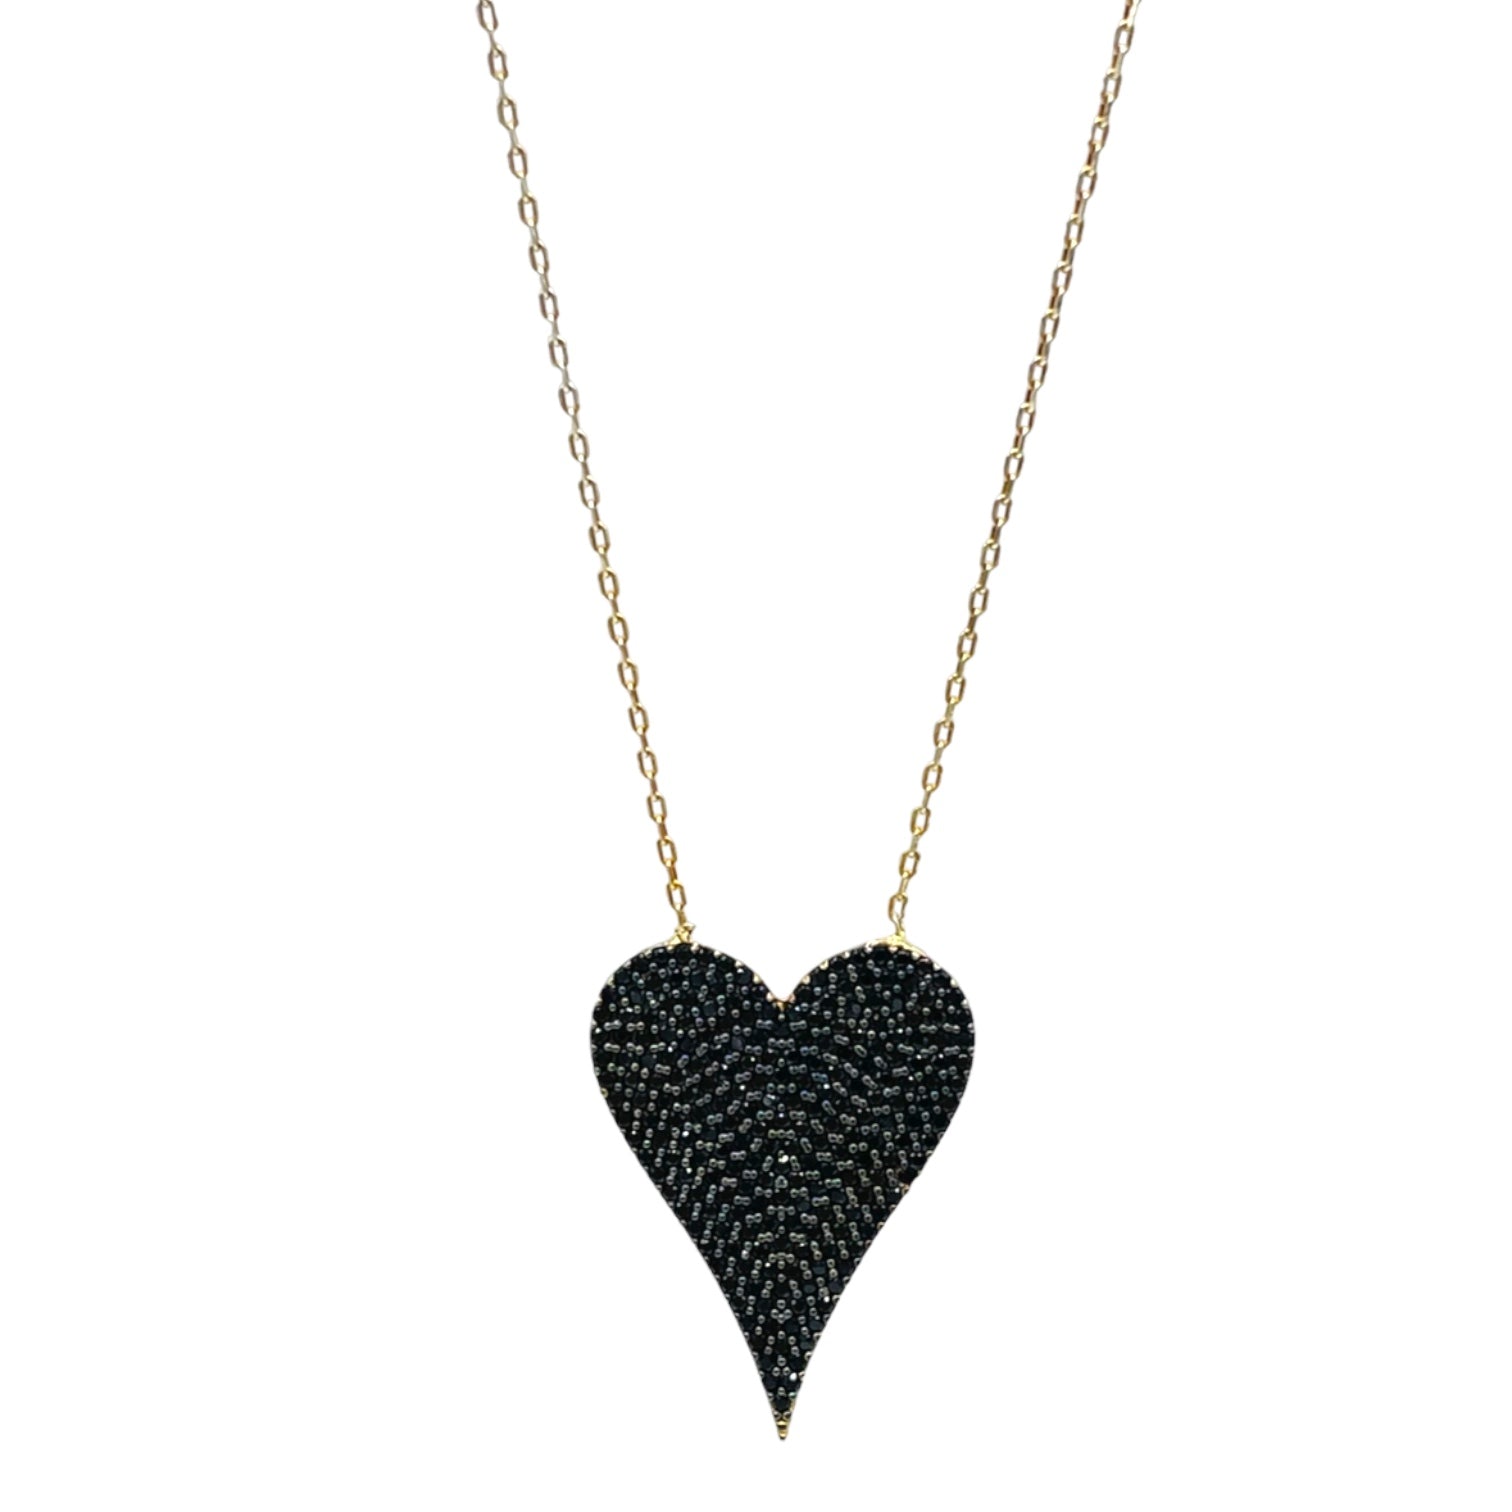 Big Love Large Black Pointed Heart Pendant Necklace